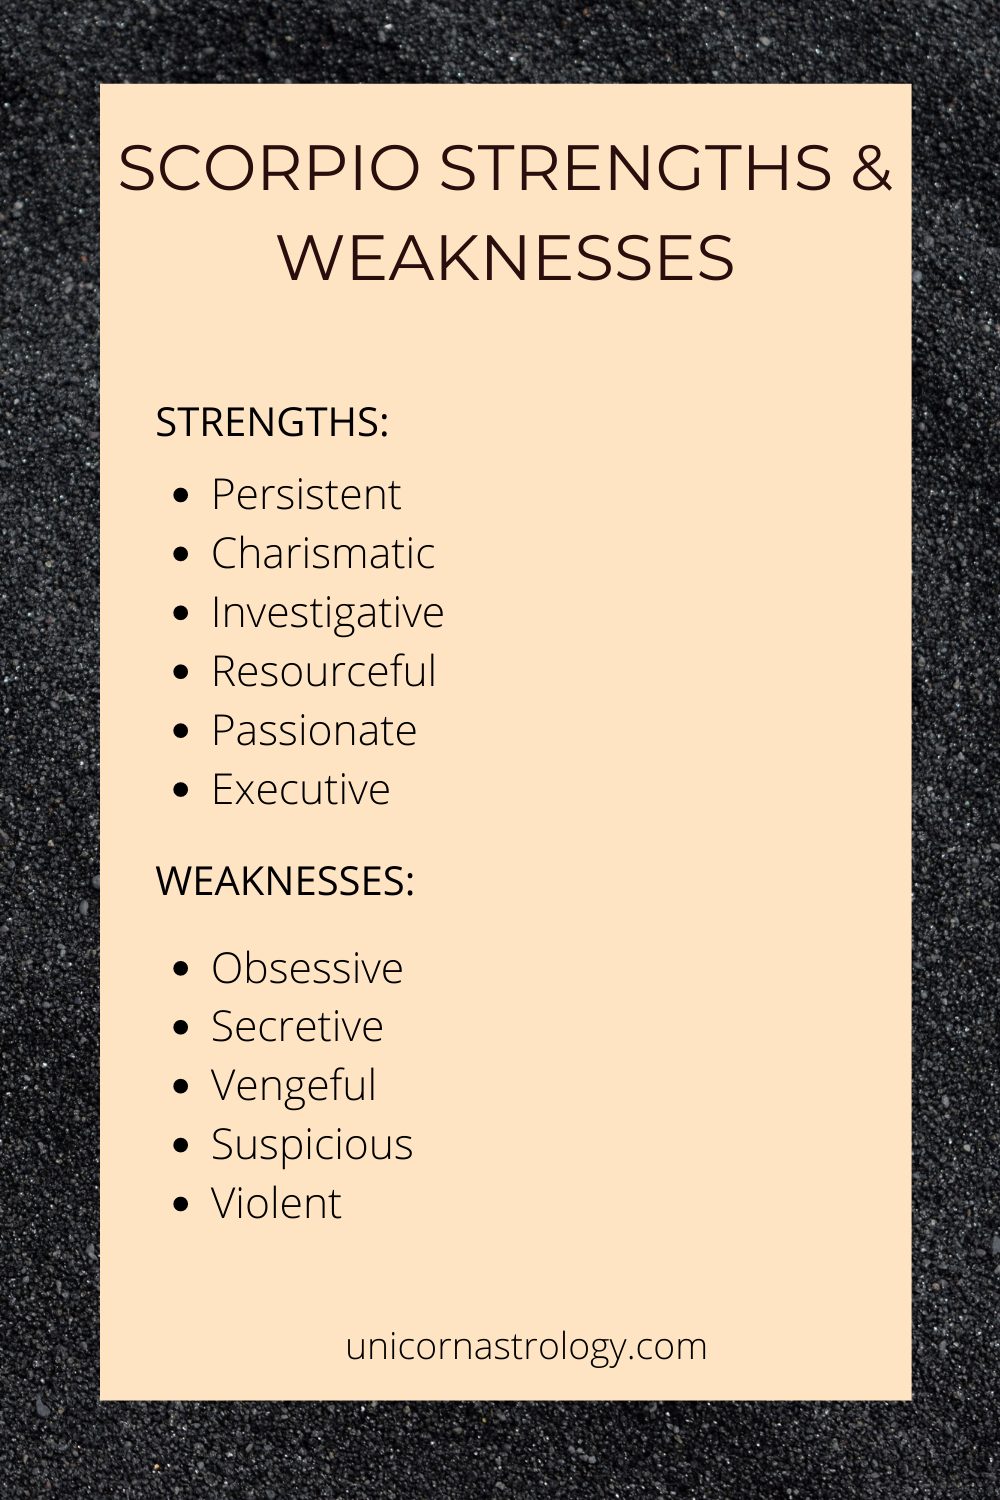 Strengths And Weaknesses